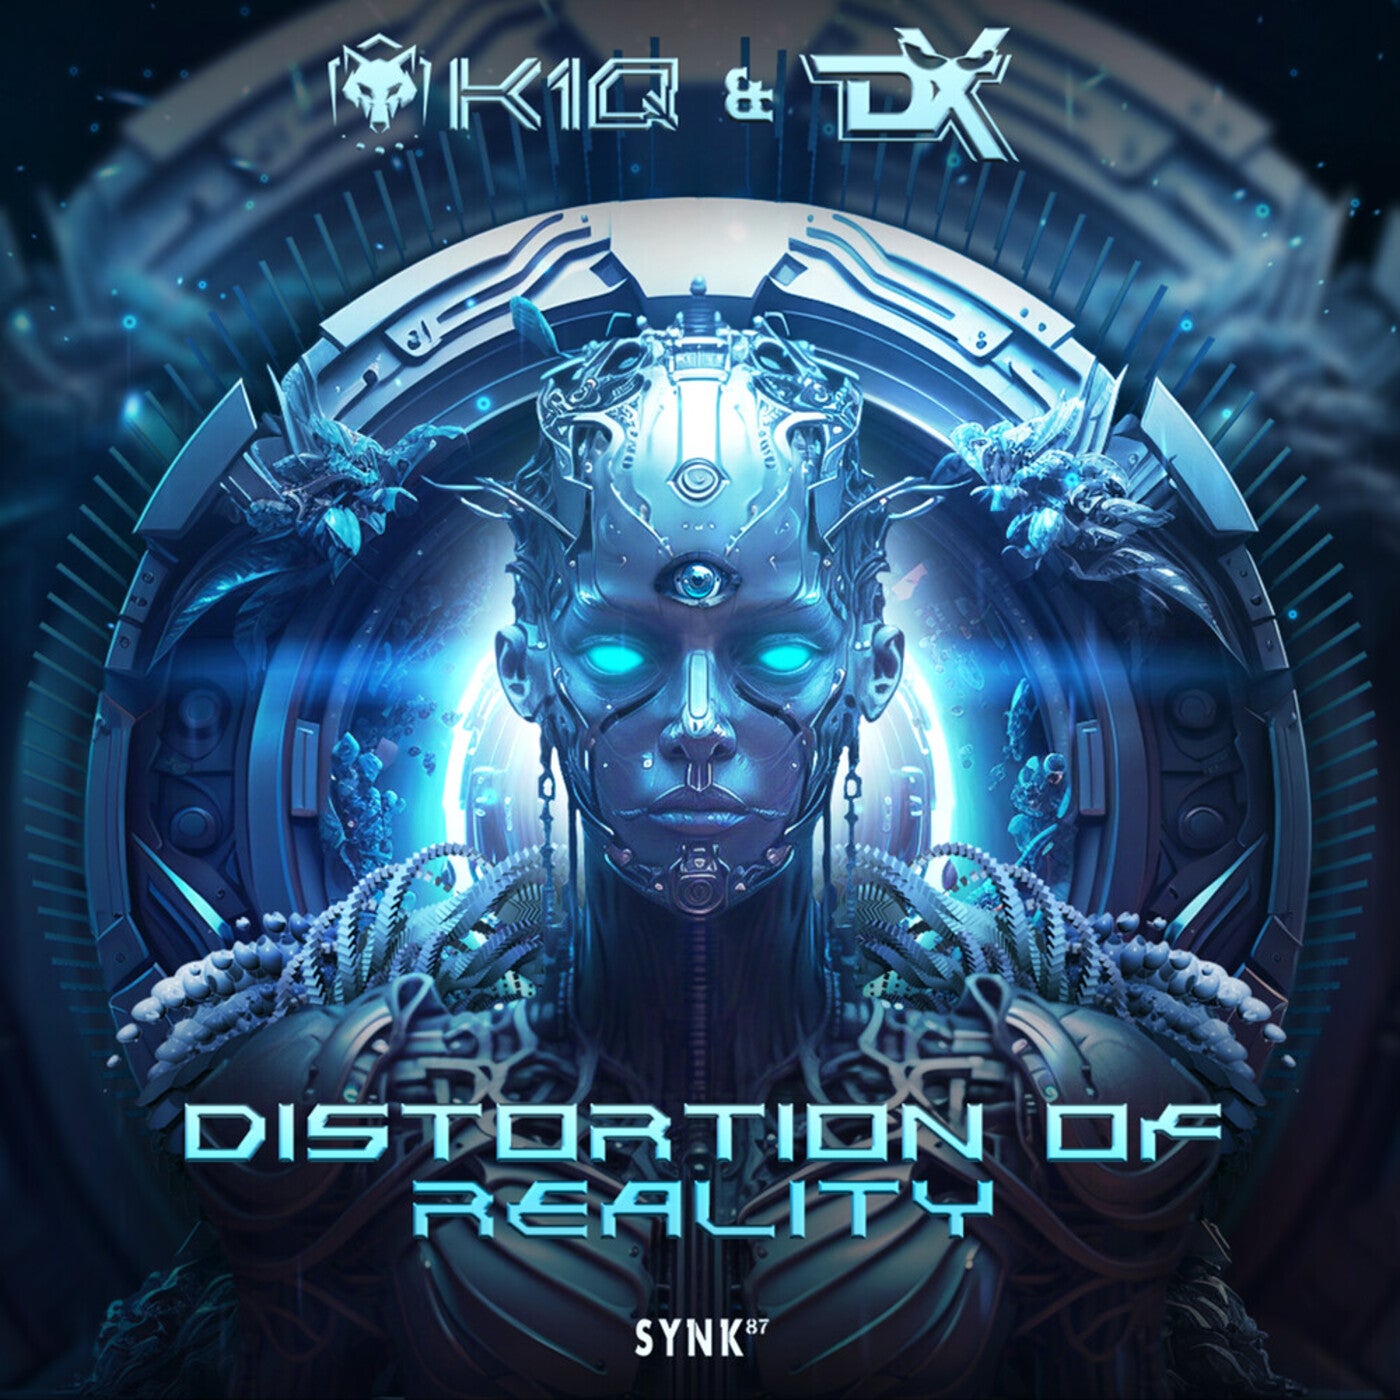 Synk. Beatport Psytrance 583. Avatar distorted reality.